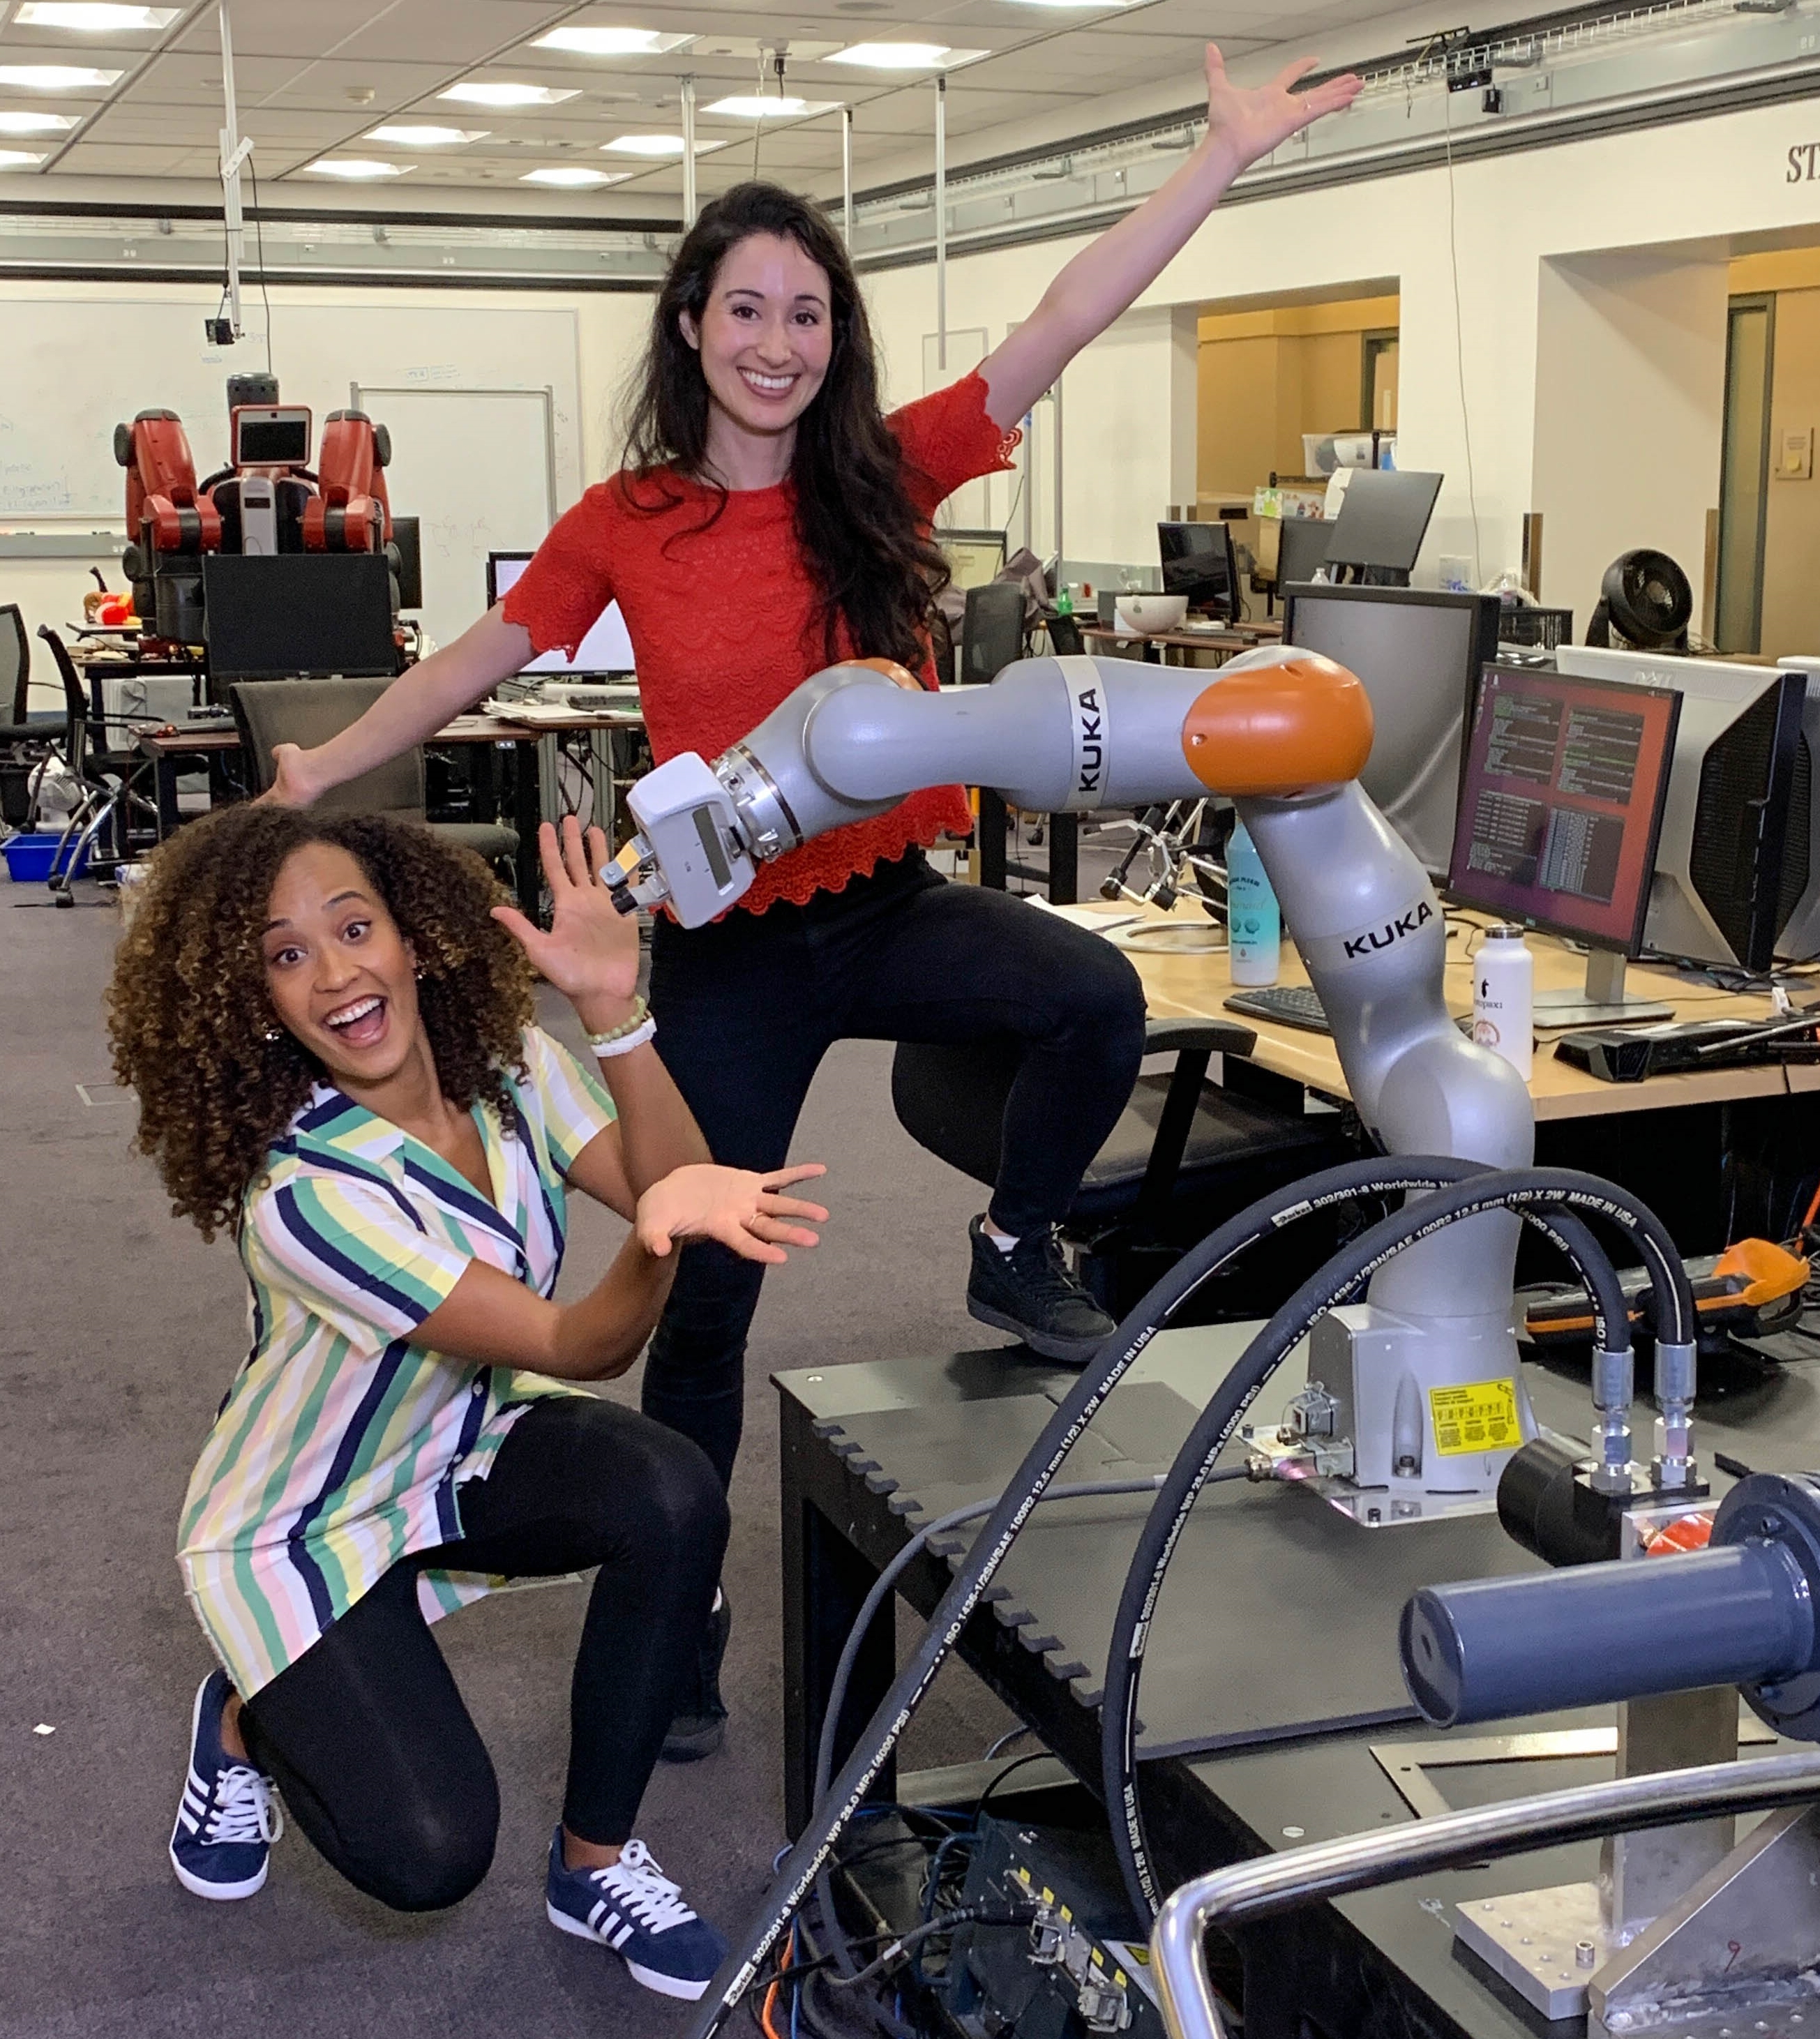 Danni Washington, a Black woman with curly hair, kneels next to a robotic arm, while Catie Cuan, stands next to her. Both women are pointing toward the robot with enthusiastic gestures.